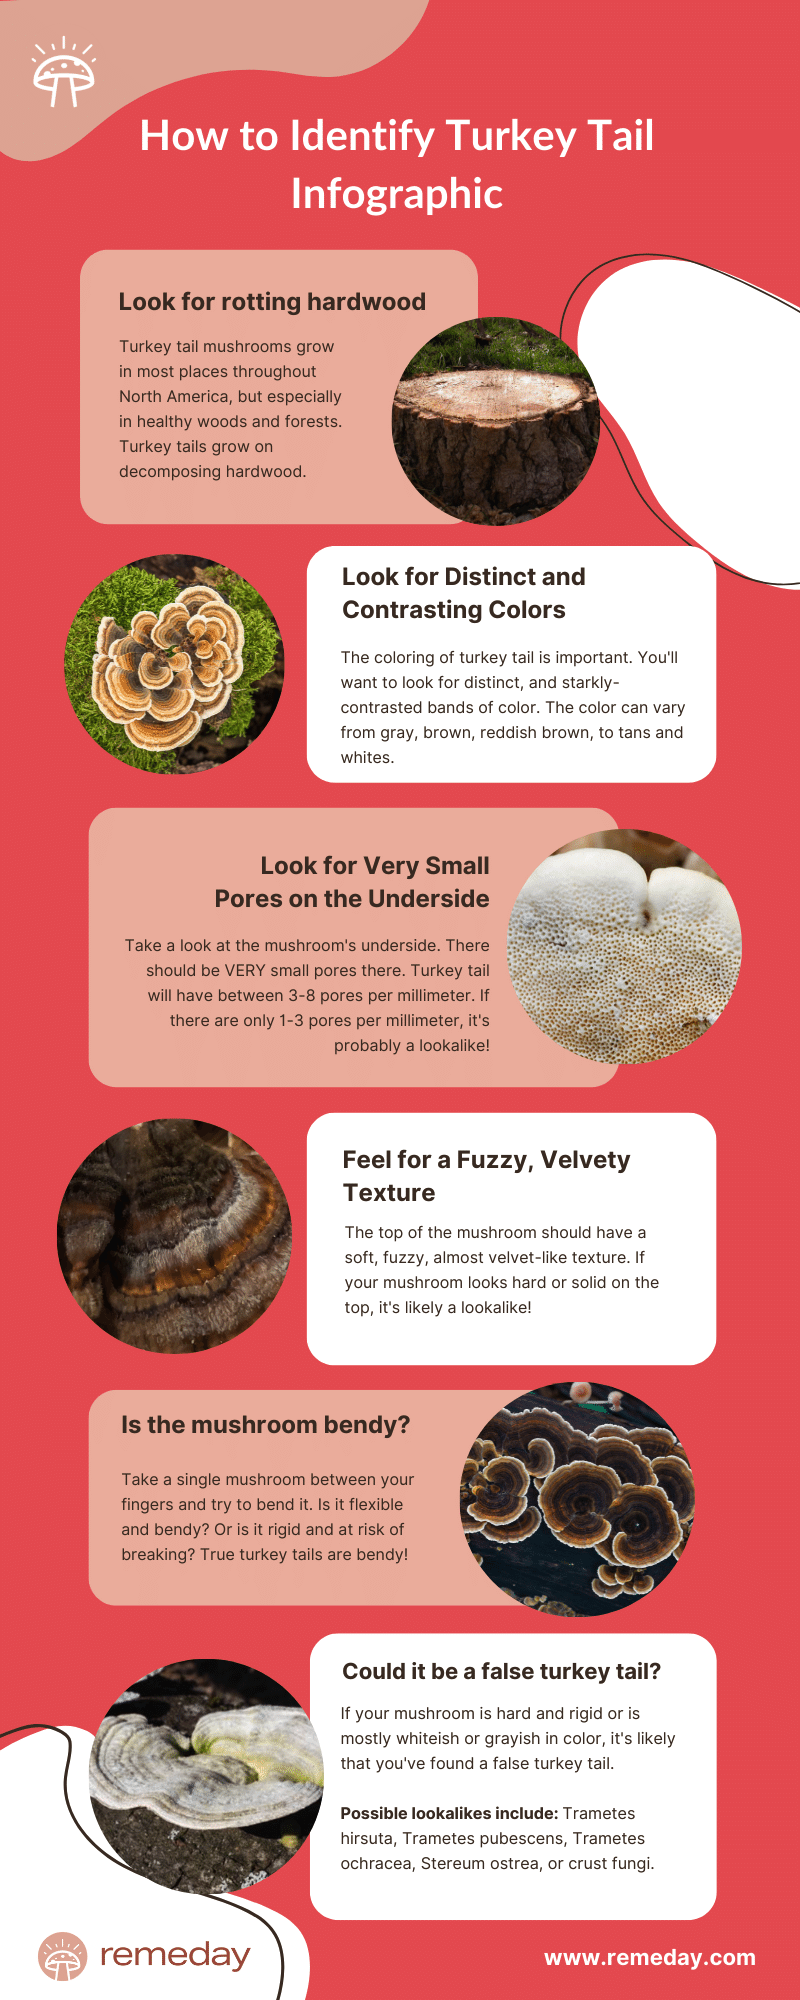 How to Identify Turkey Tail Infographic-1